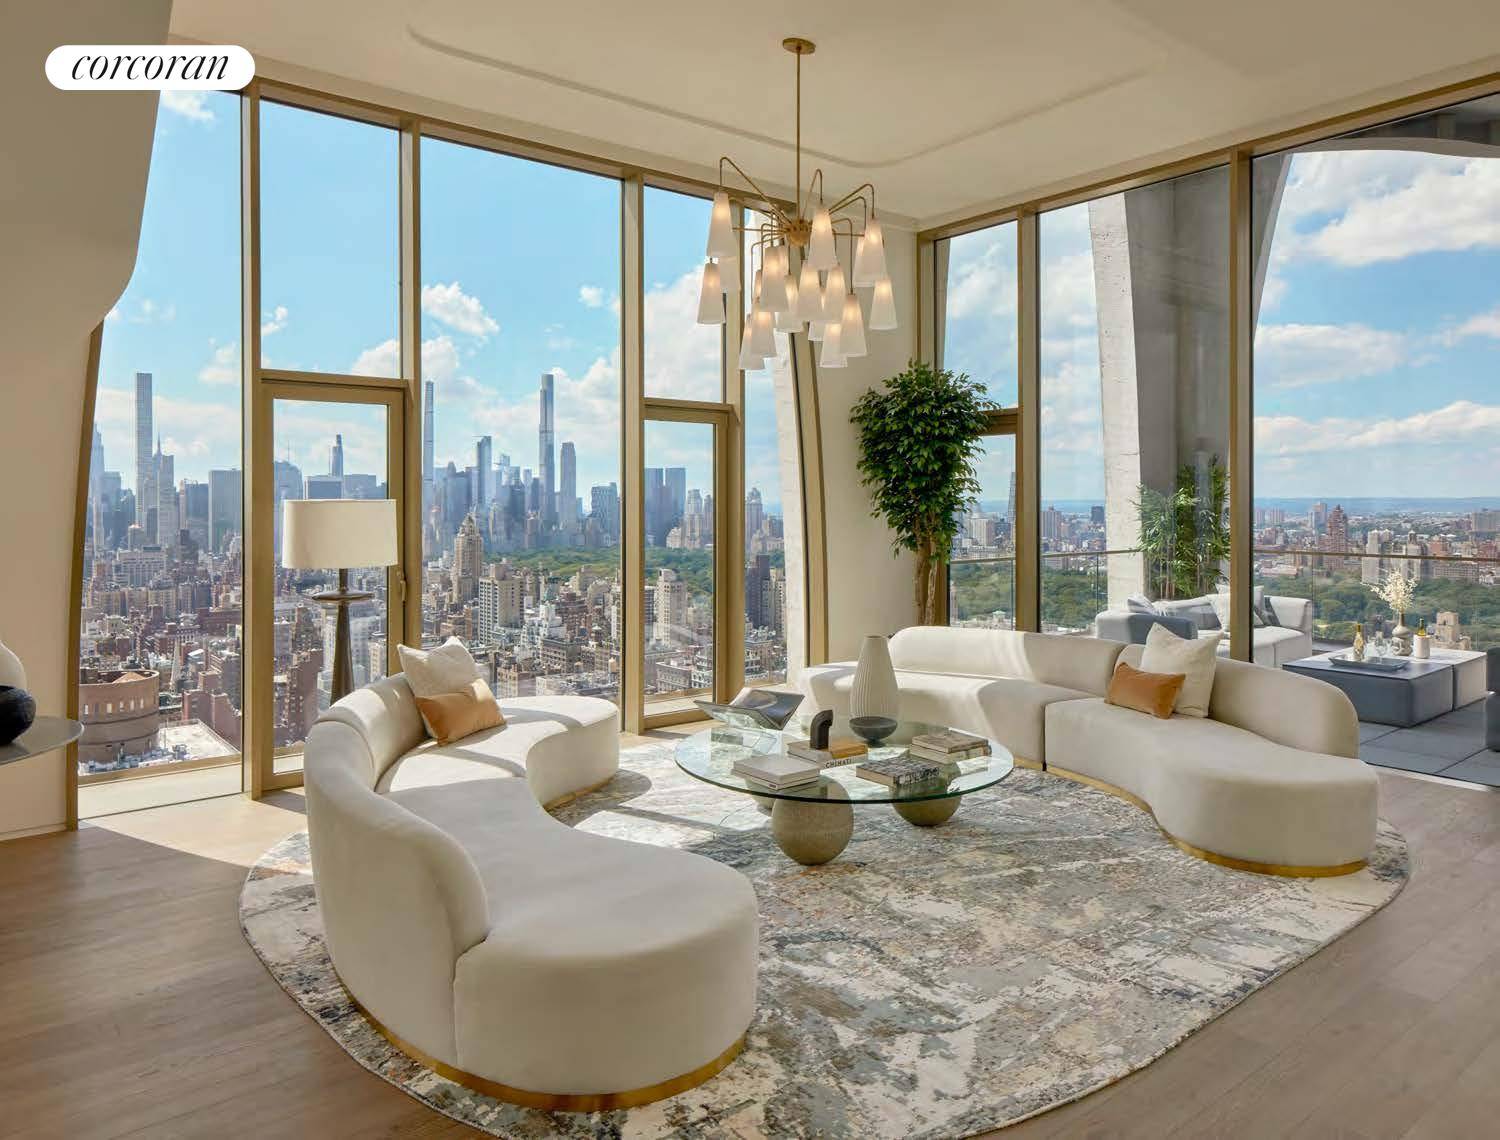 At the highest elevation north of 72nd Street on the UES, the newly released penthouse at 180 E.